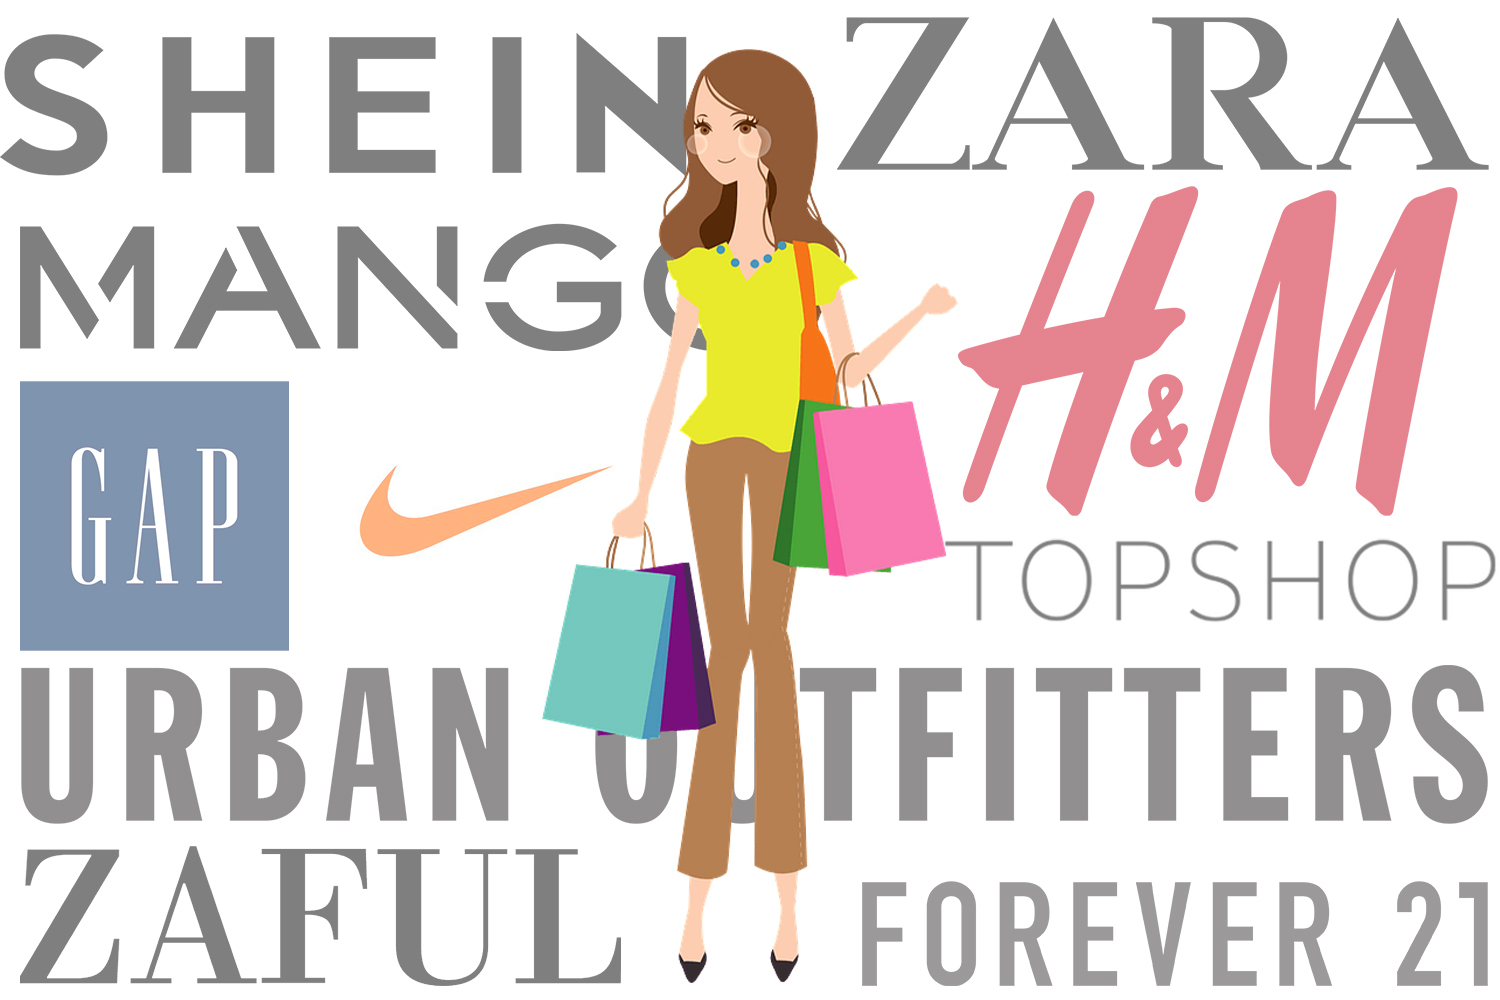 From Zero to Zara: The Secret of Fast Fashion - Healy Consultants Group Blog